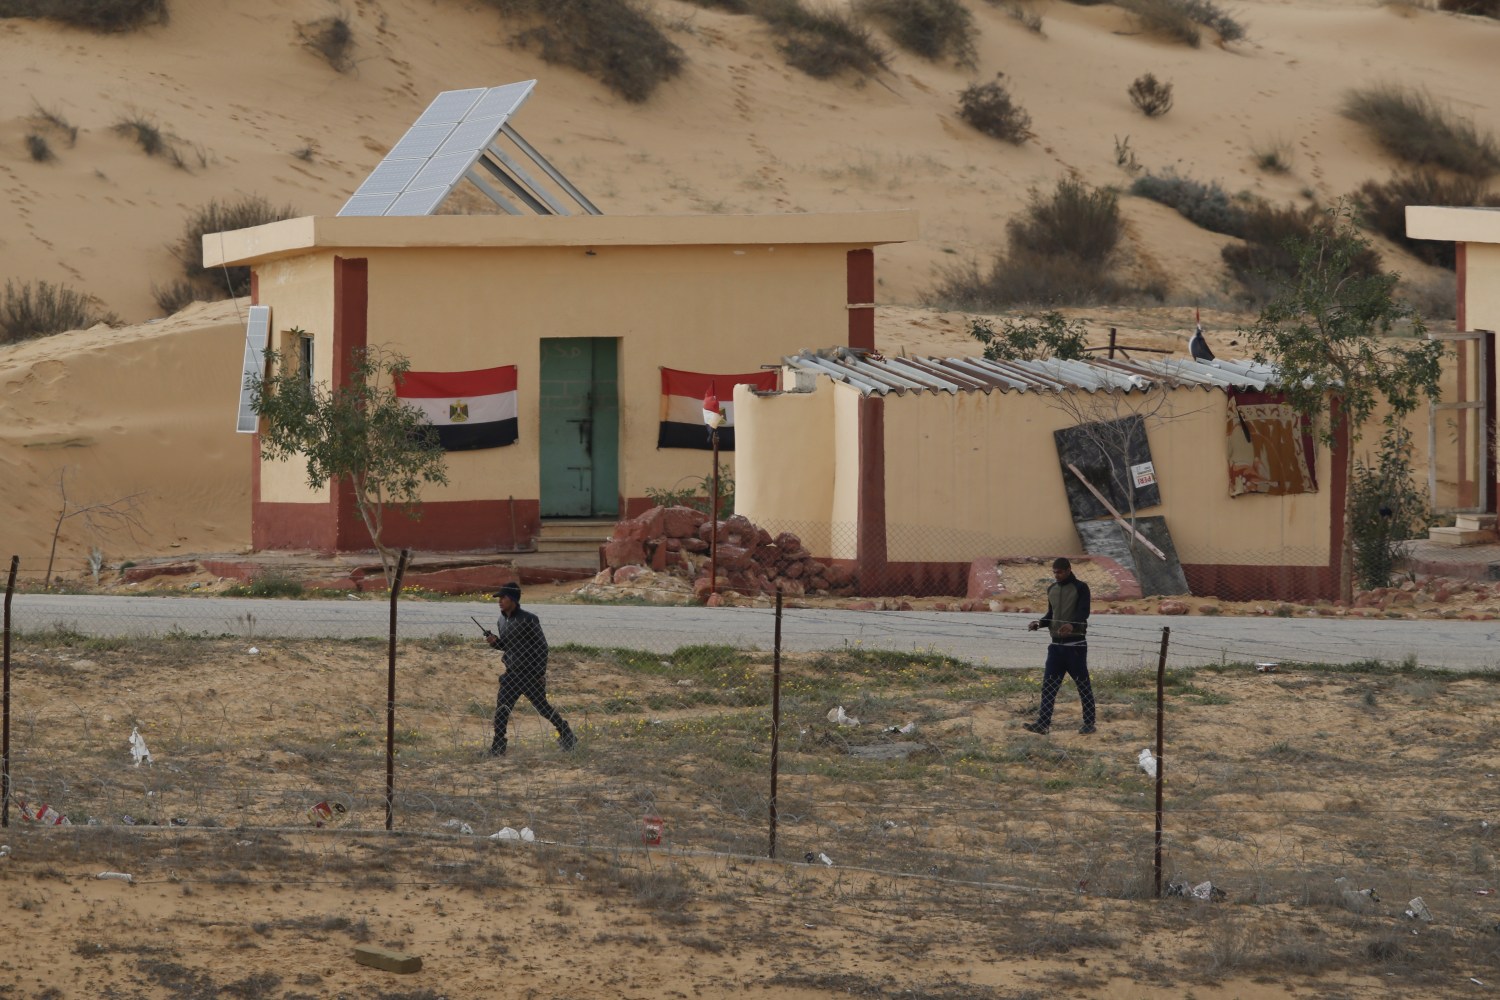 Egyptian policemen walk next to a border post, as seen from the Israeli side of the border with Egypt's Sinai peninsula, in Israel's Negev Desert February 10, 2016. REUTERS/Amir Cohen